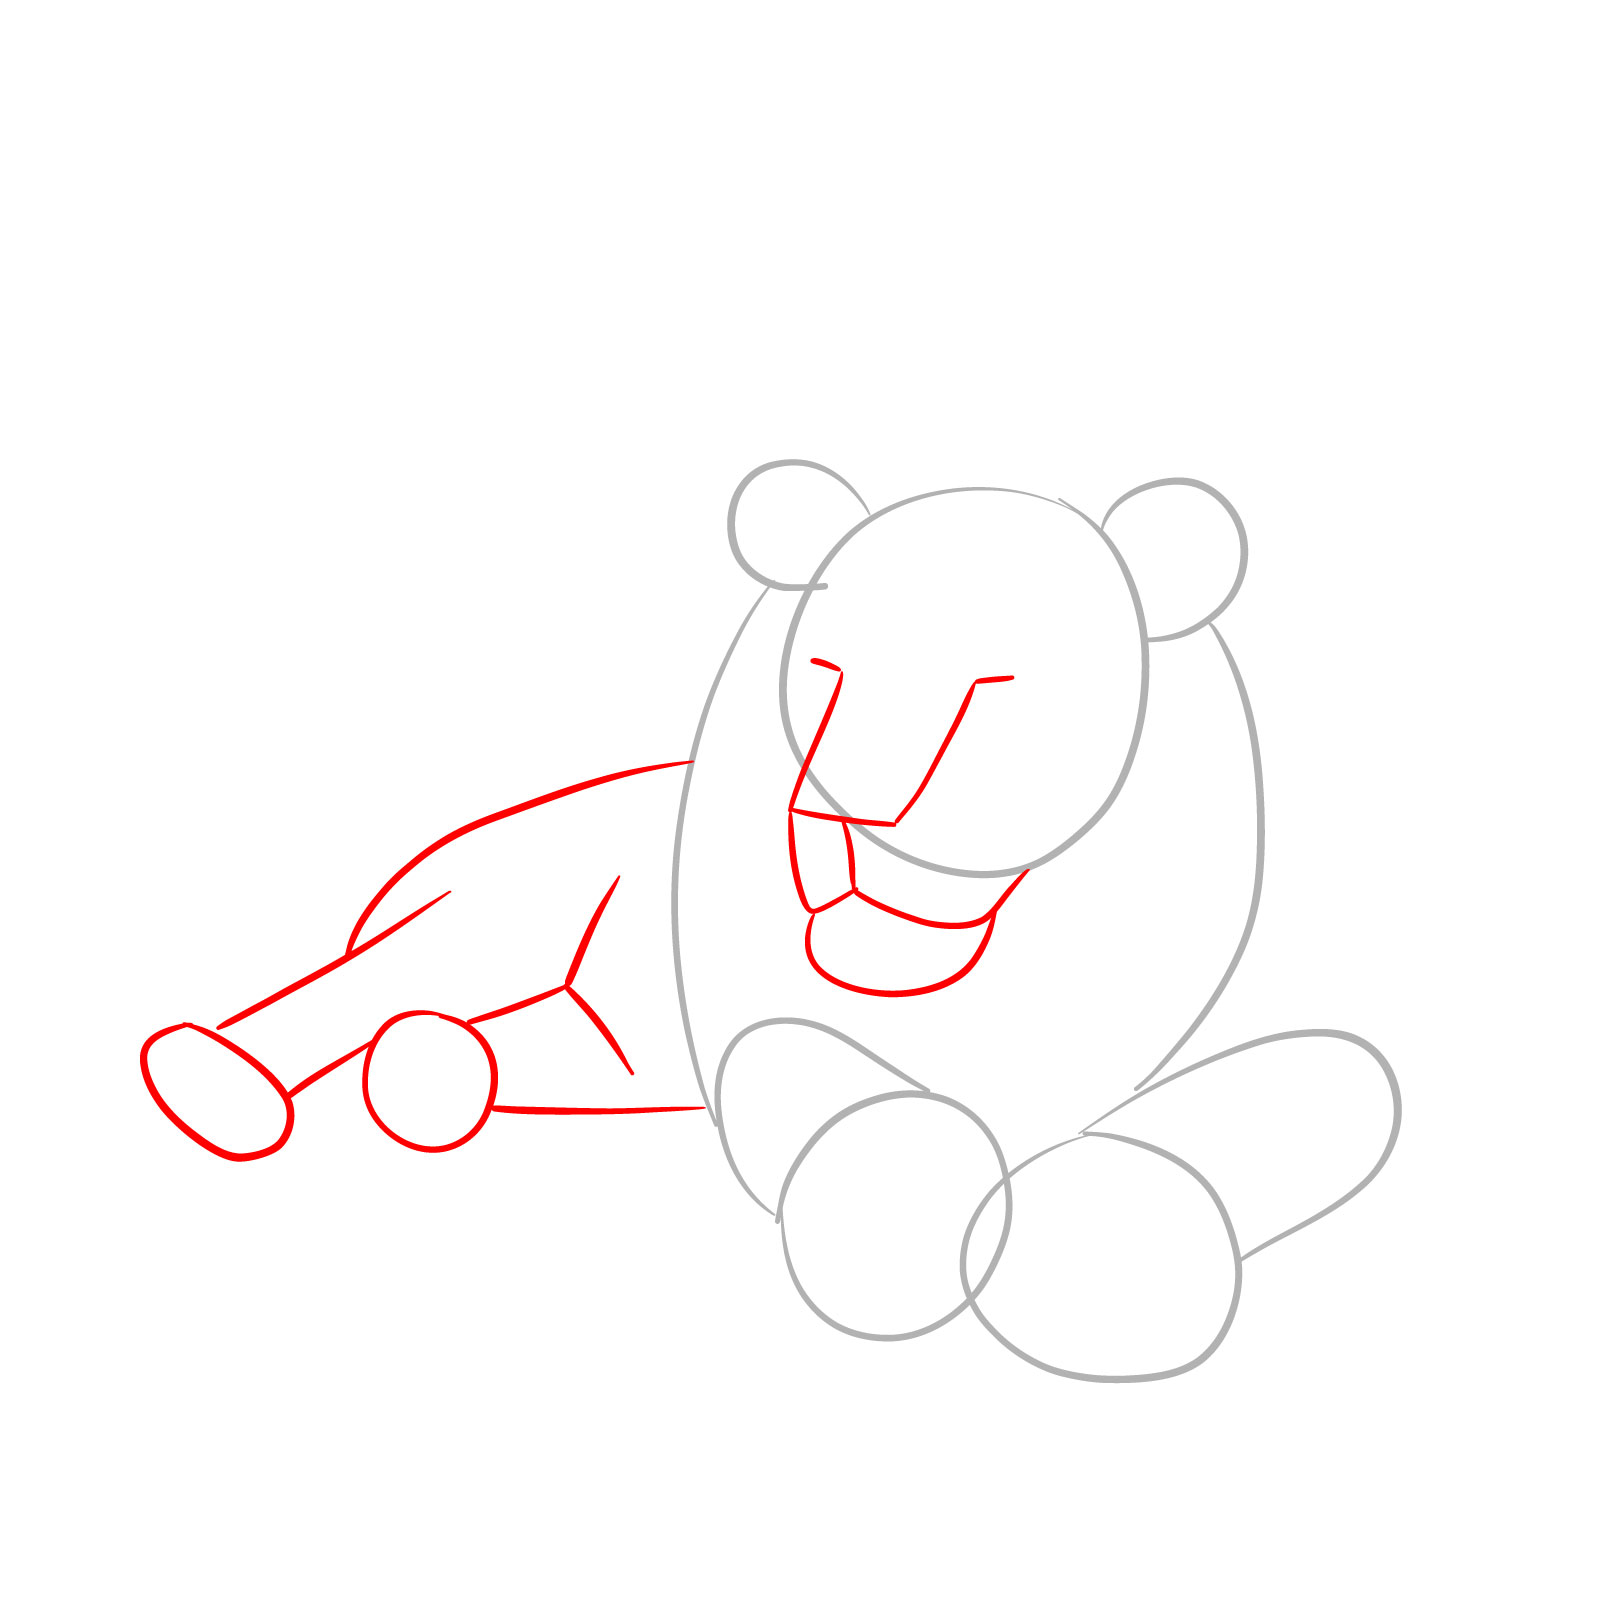 Sleeping lion drawing - Step 2: Facial guidelines and body outline